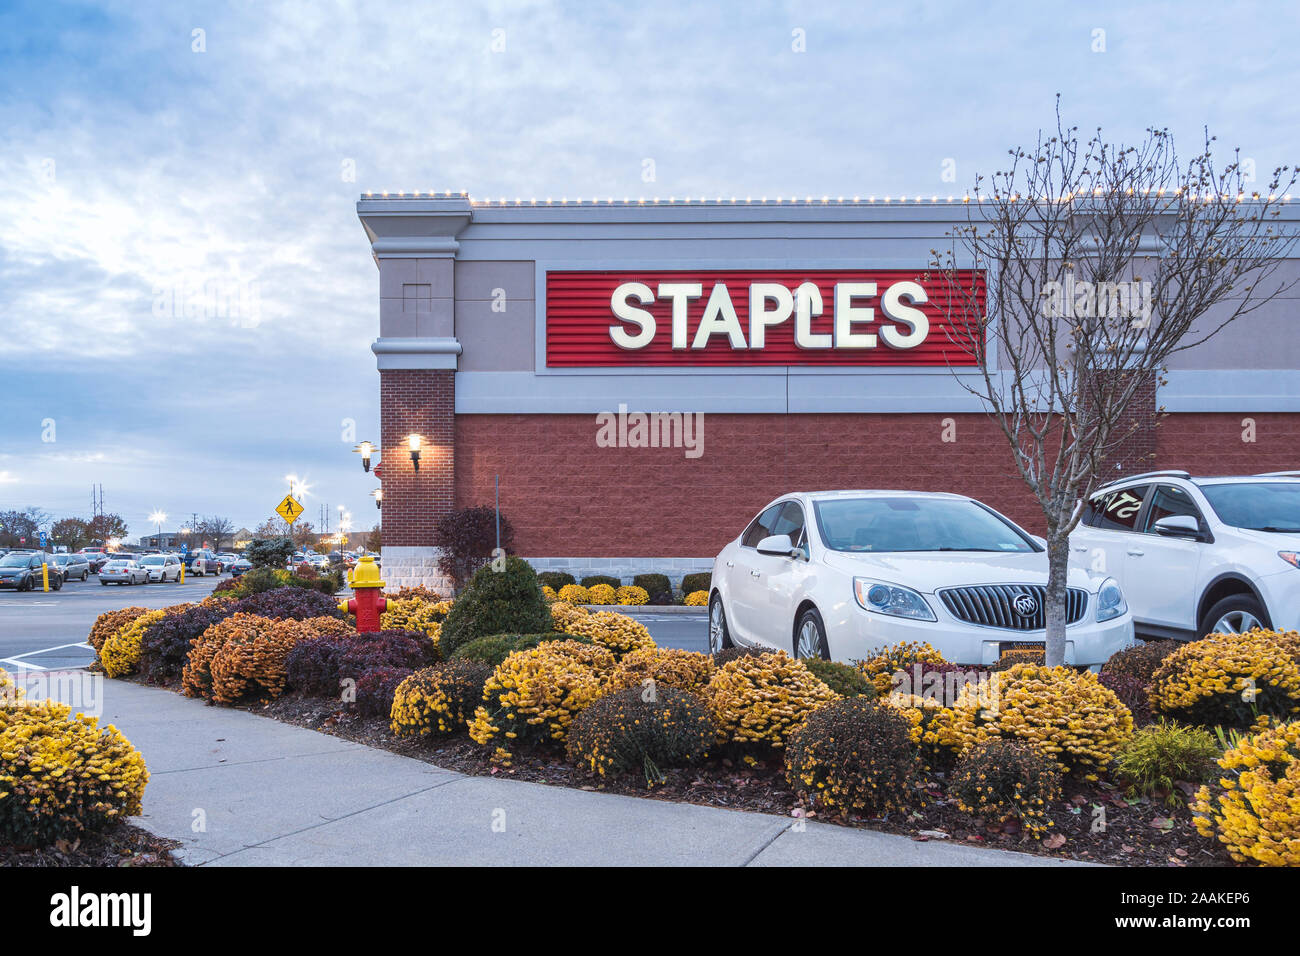 New Hartford, New York - Nov 10, 2019: Staples is an American office retail company, involved in the sale of office supplies and related products chai Stock Photo